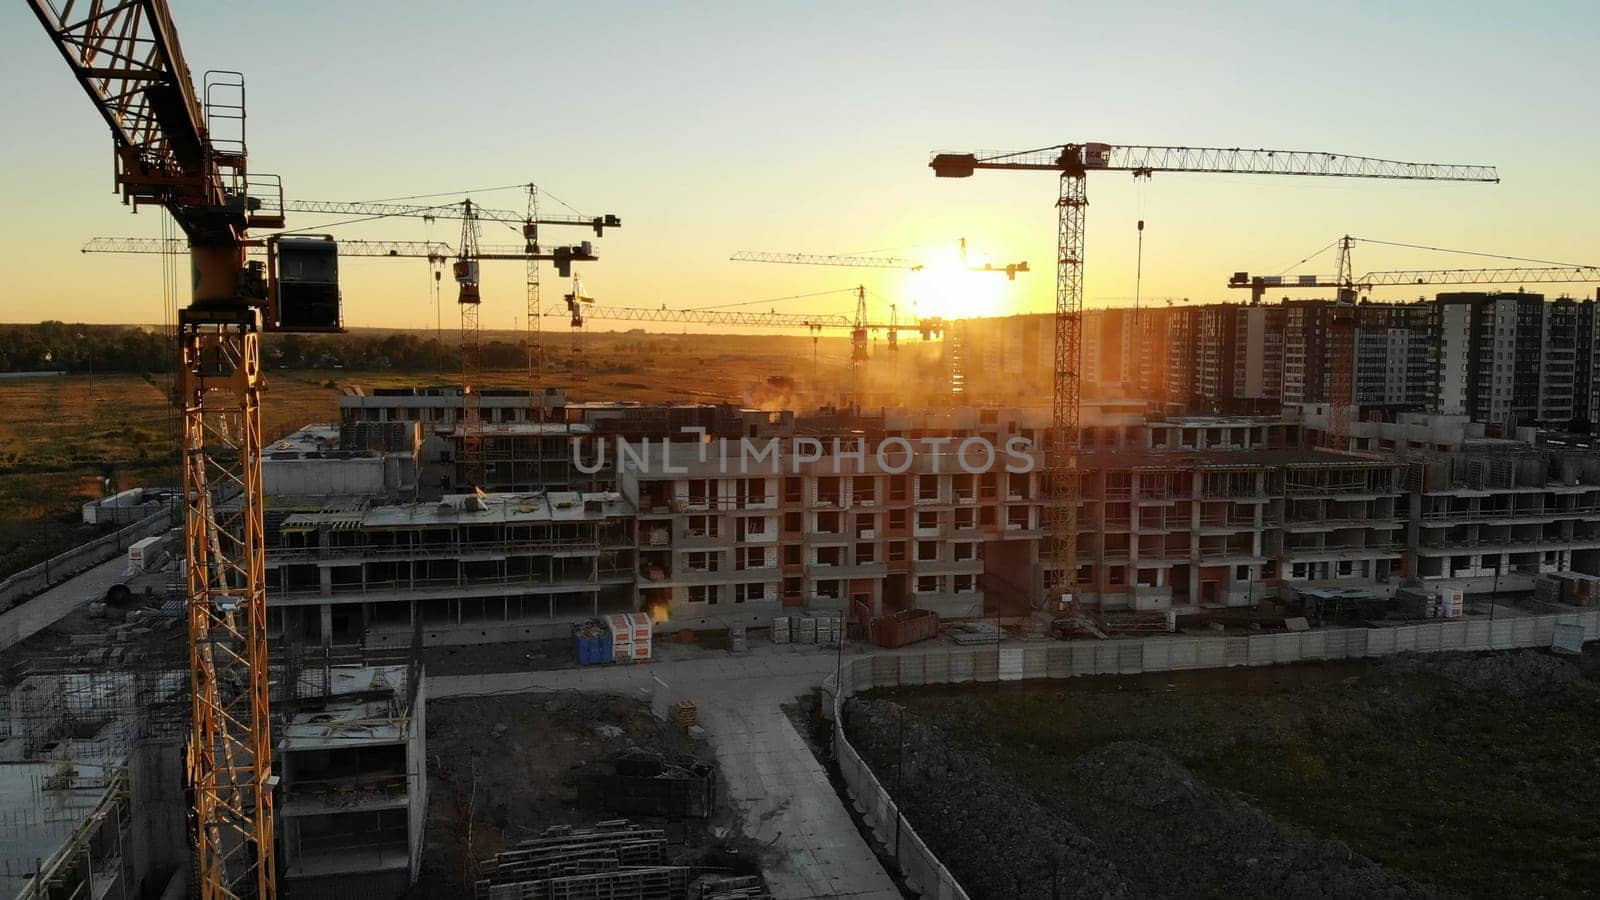 Silhouettes of construction cranes at sunset